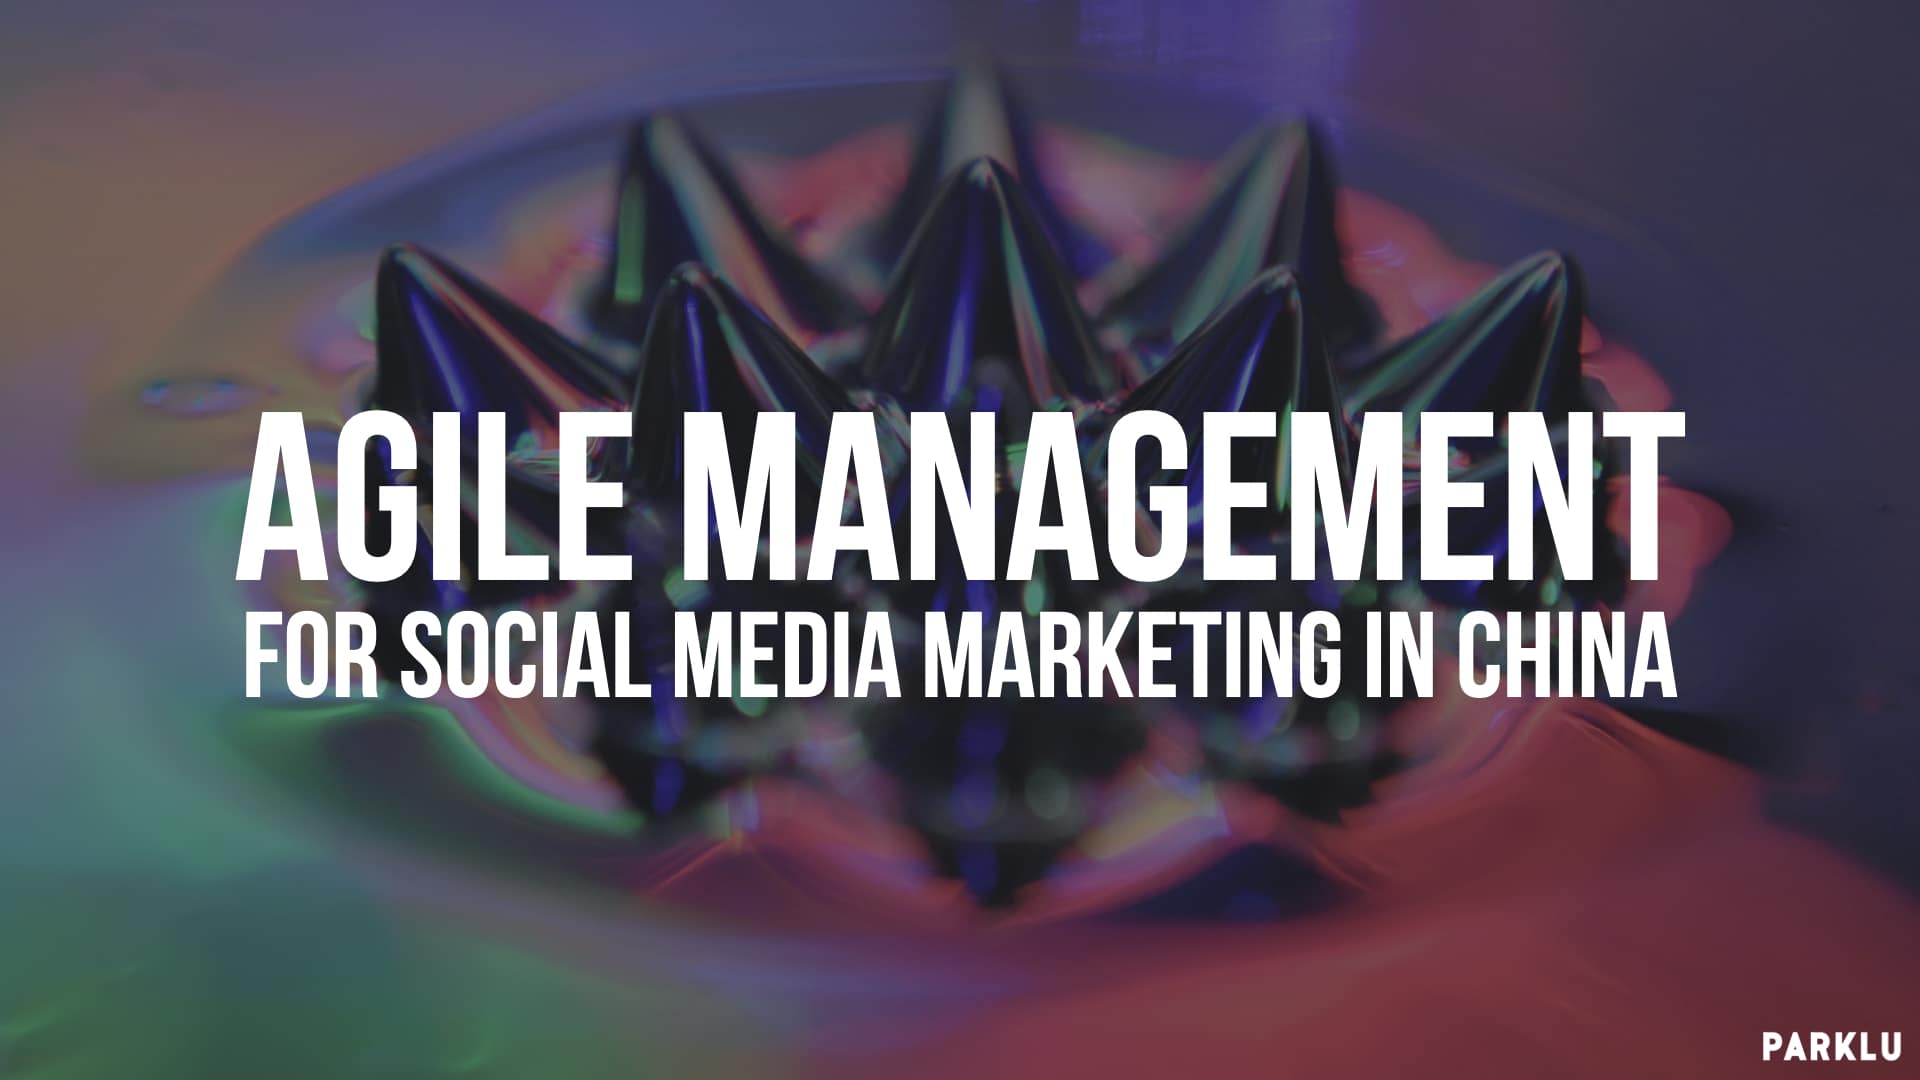 Agile Management- for social media marketing in China